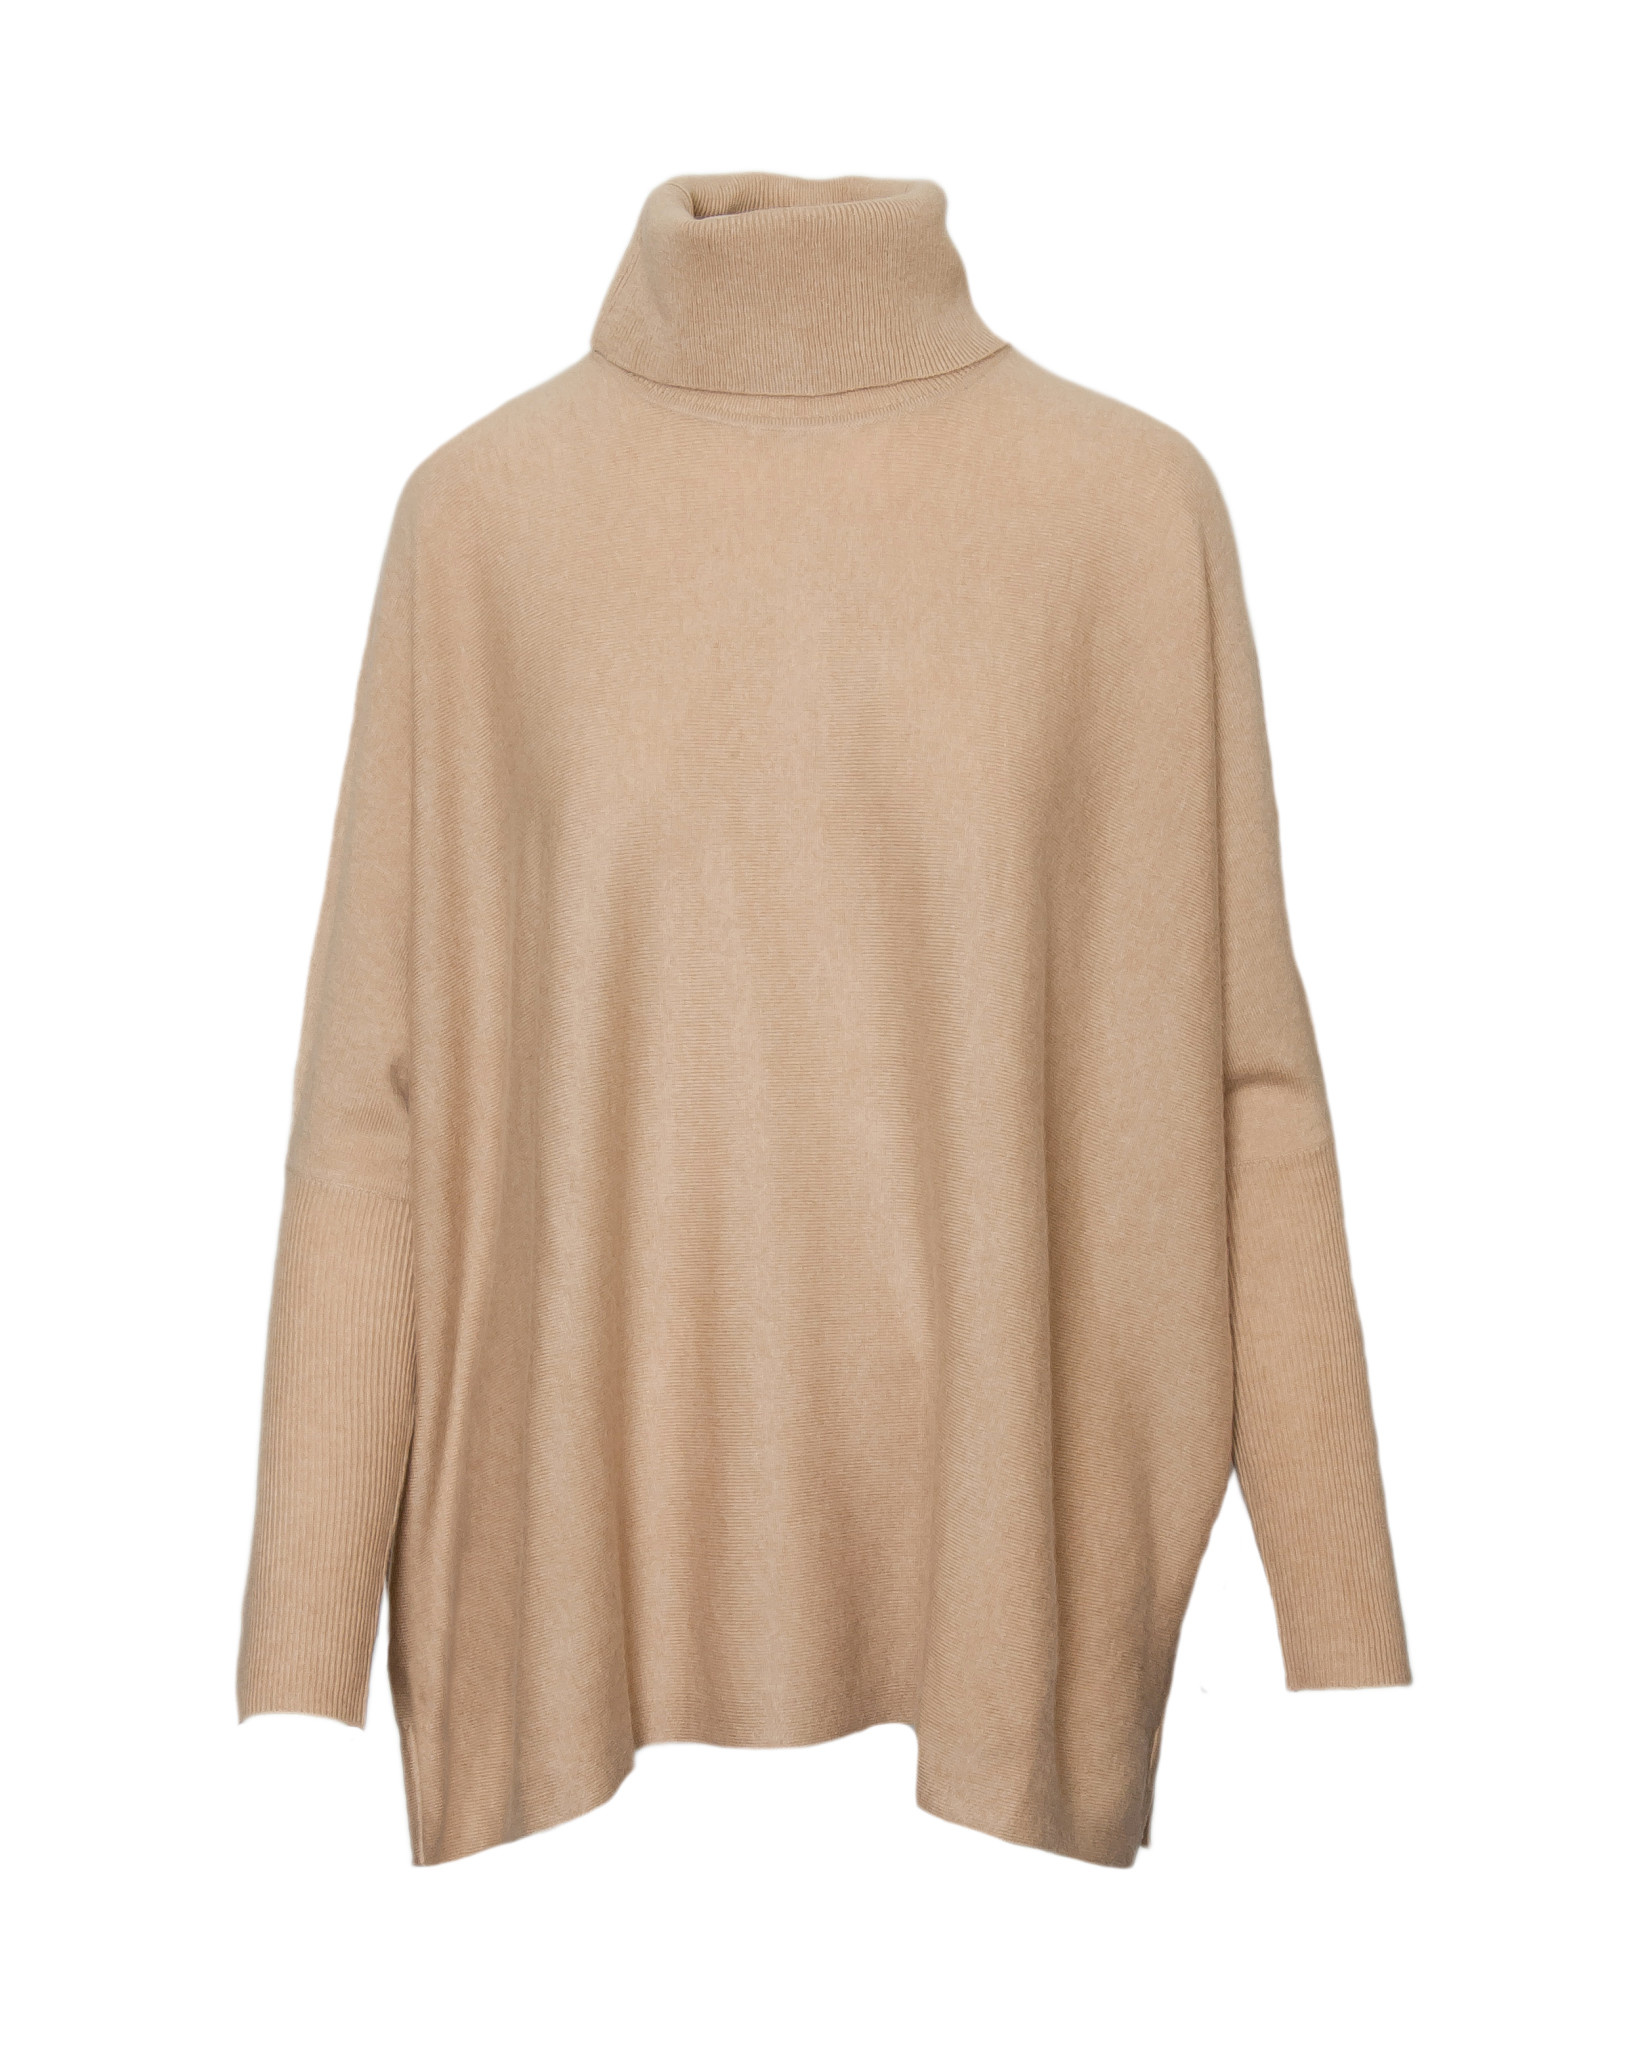 REPEAT Cashmere Oversize Dolman Sleeve Sweater, 200060 - Touch of Class